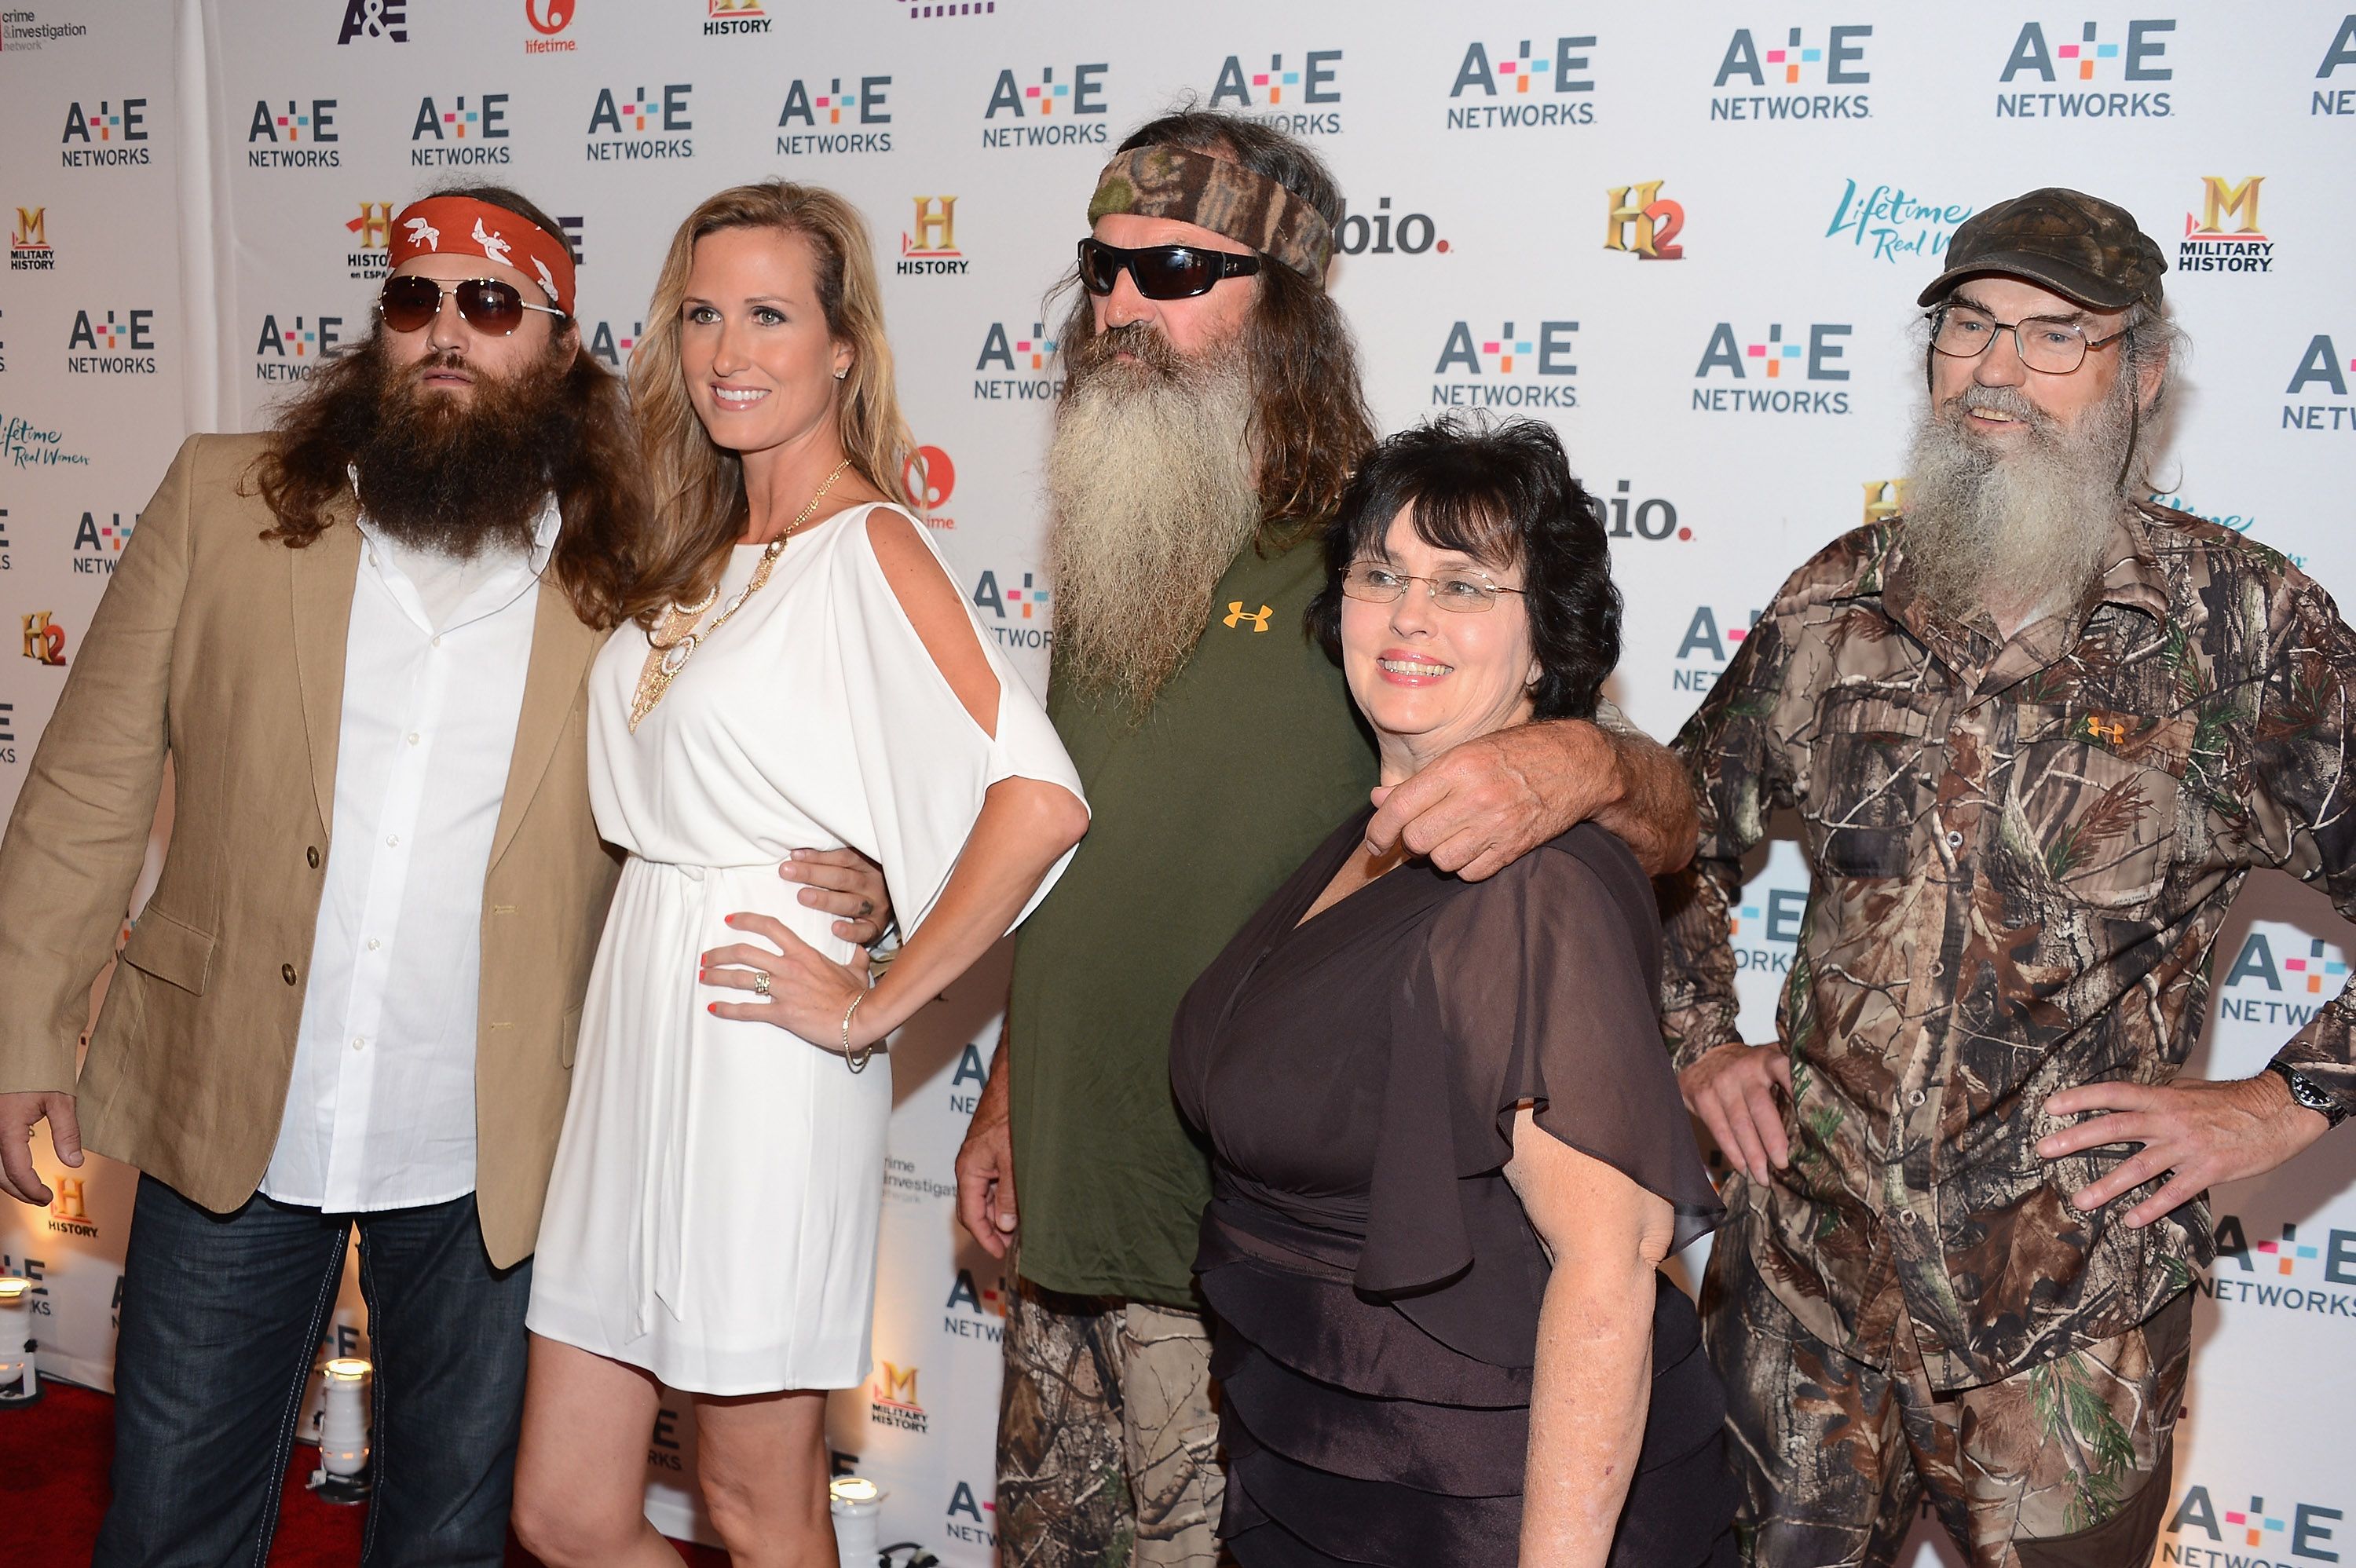 Duck Dynasty Ending On A E After 11 Season Robertson Family Signs Off Reality Show